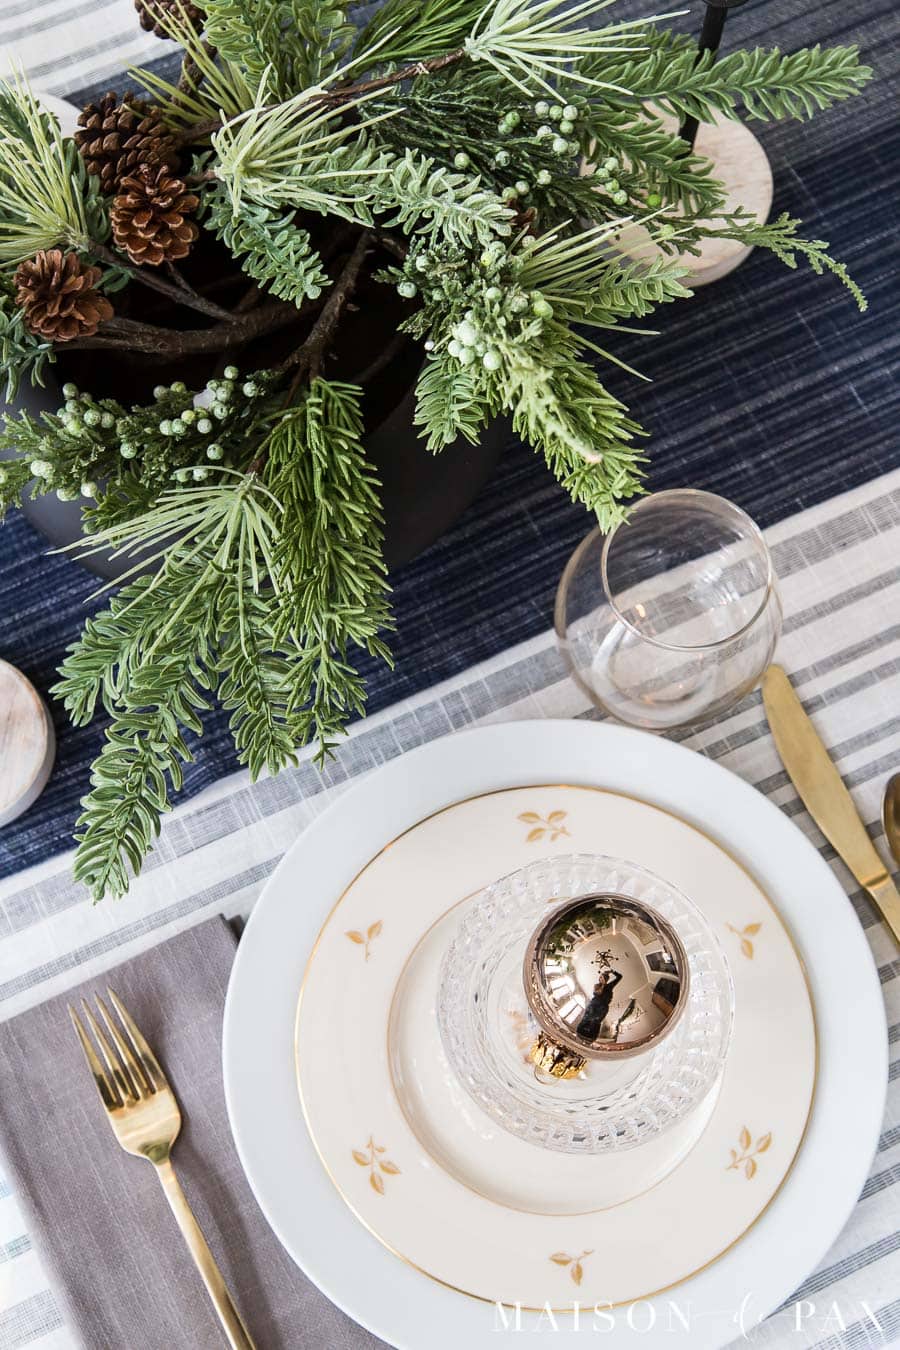 basic white dishes mixed with formal china for a holiday place setting